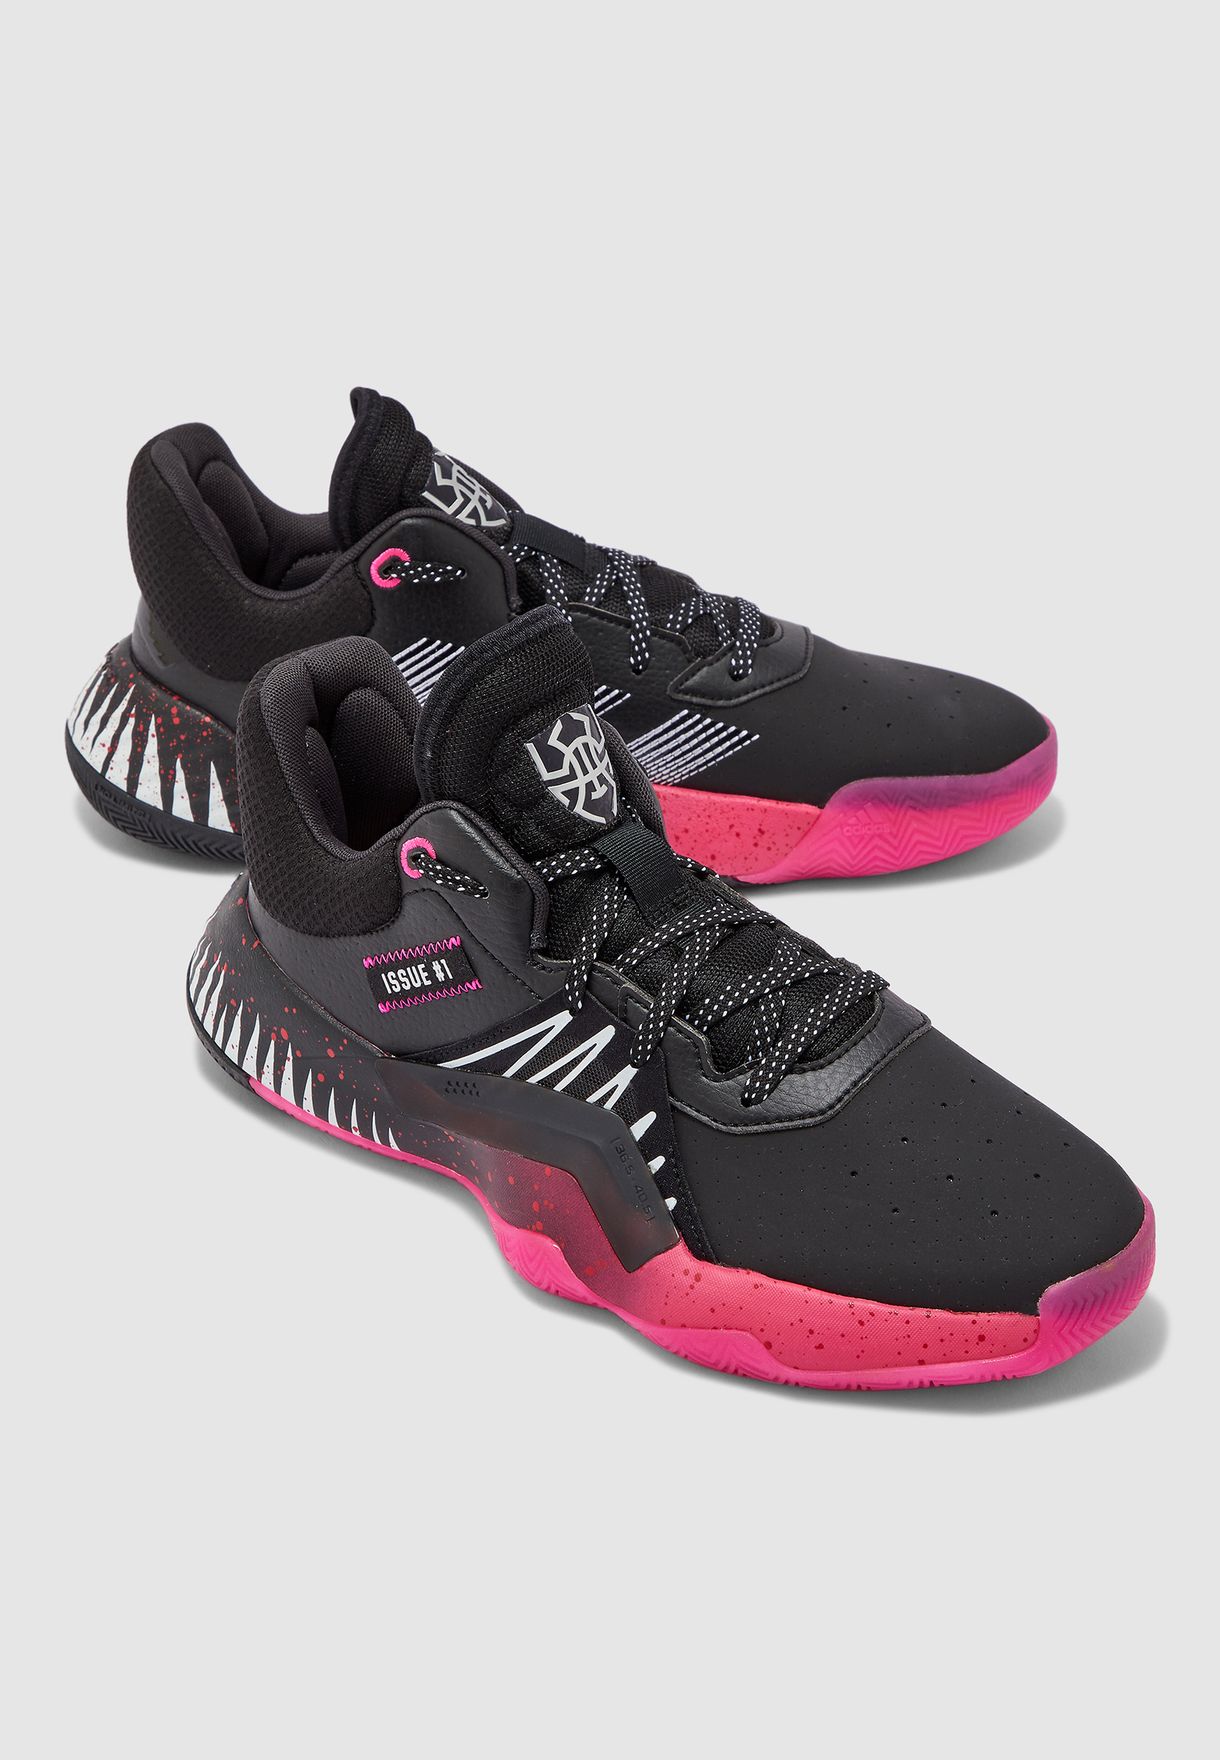 adidas don issue 1 black pink